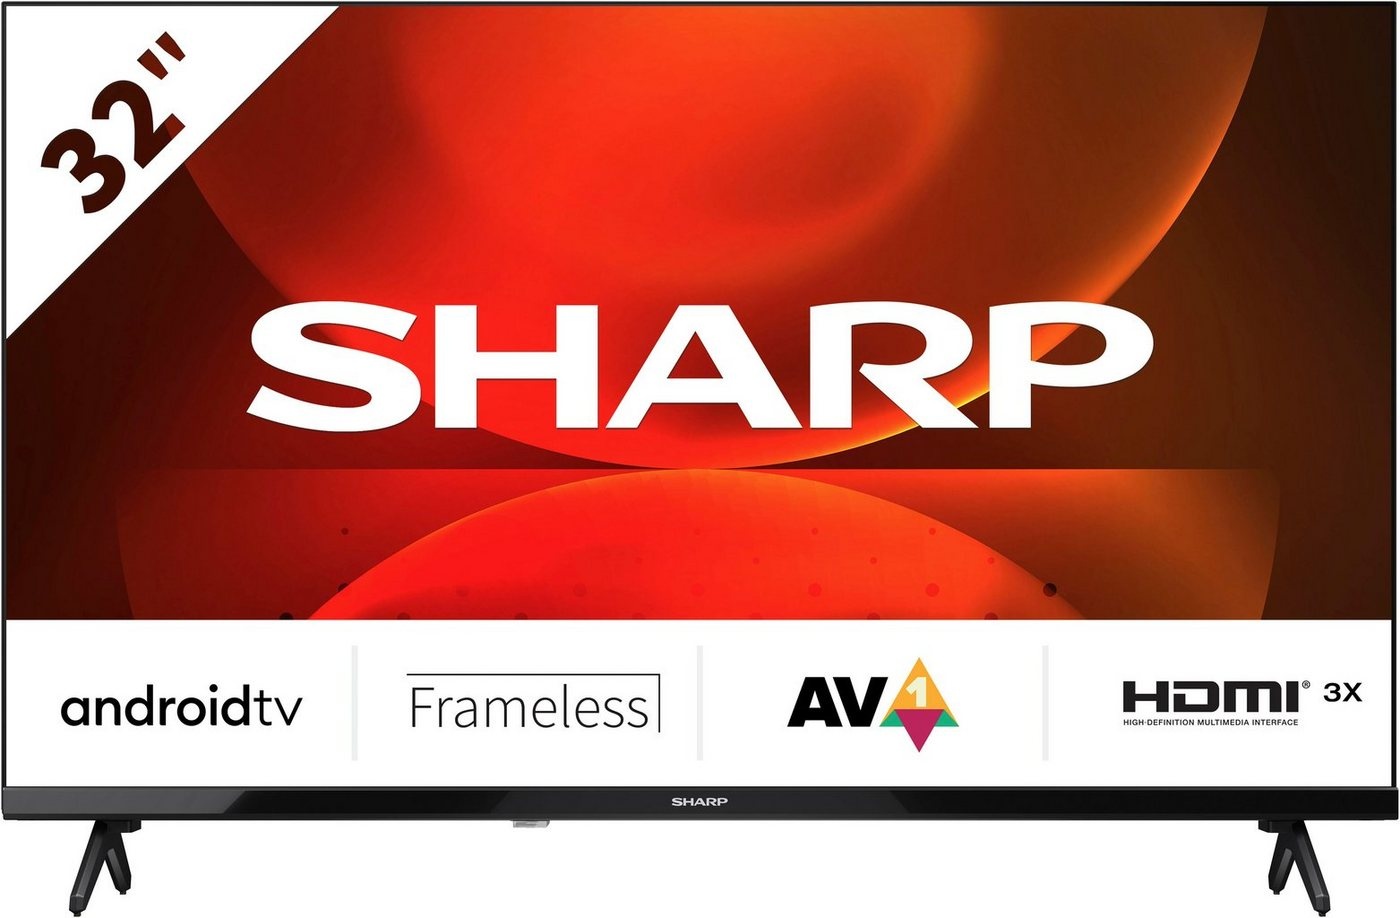 Sharp 1T-C32FHx LED-Fernseher (80 cm/32 Zoll, HD-ready, Android TV, Smart-TV, Frameless Android TV, 3X HDMI) schwarz